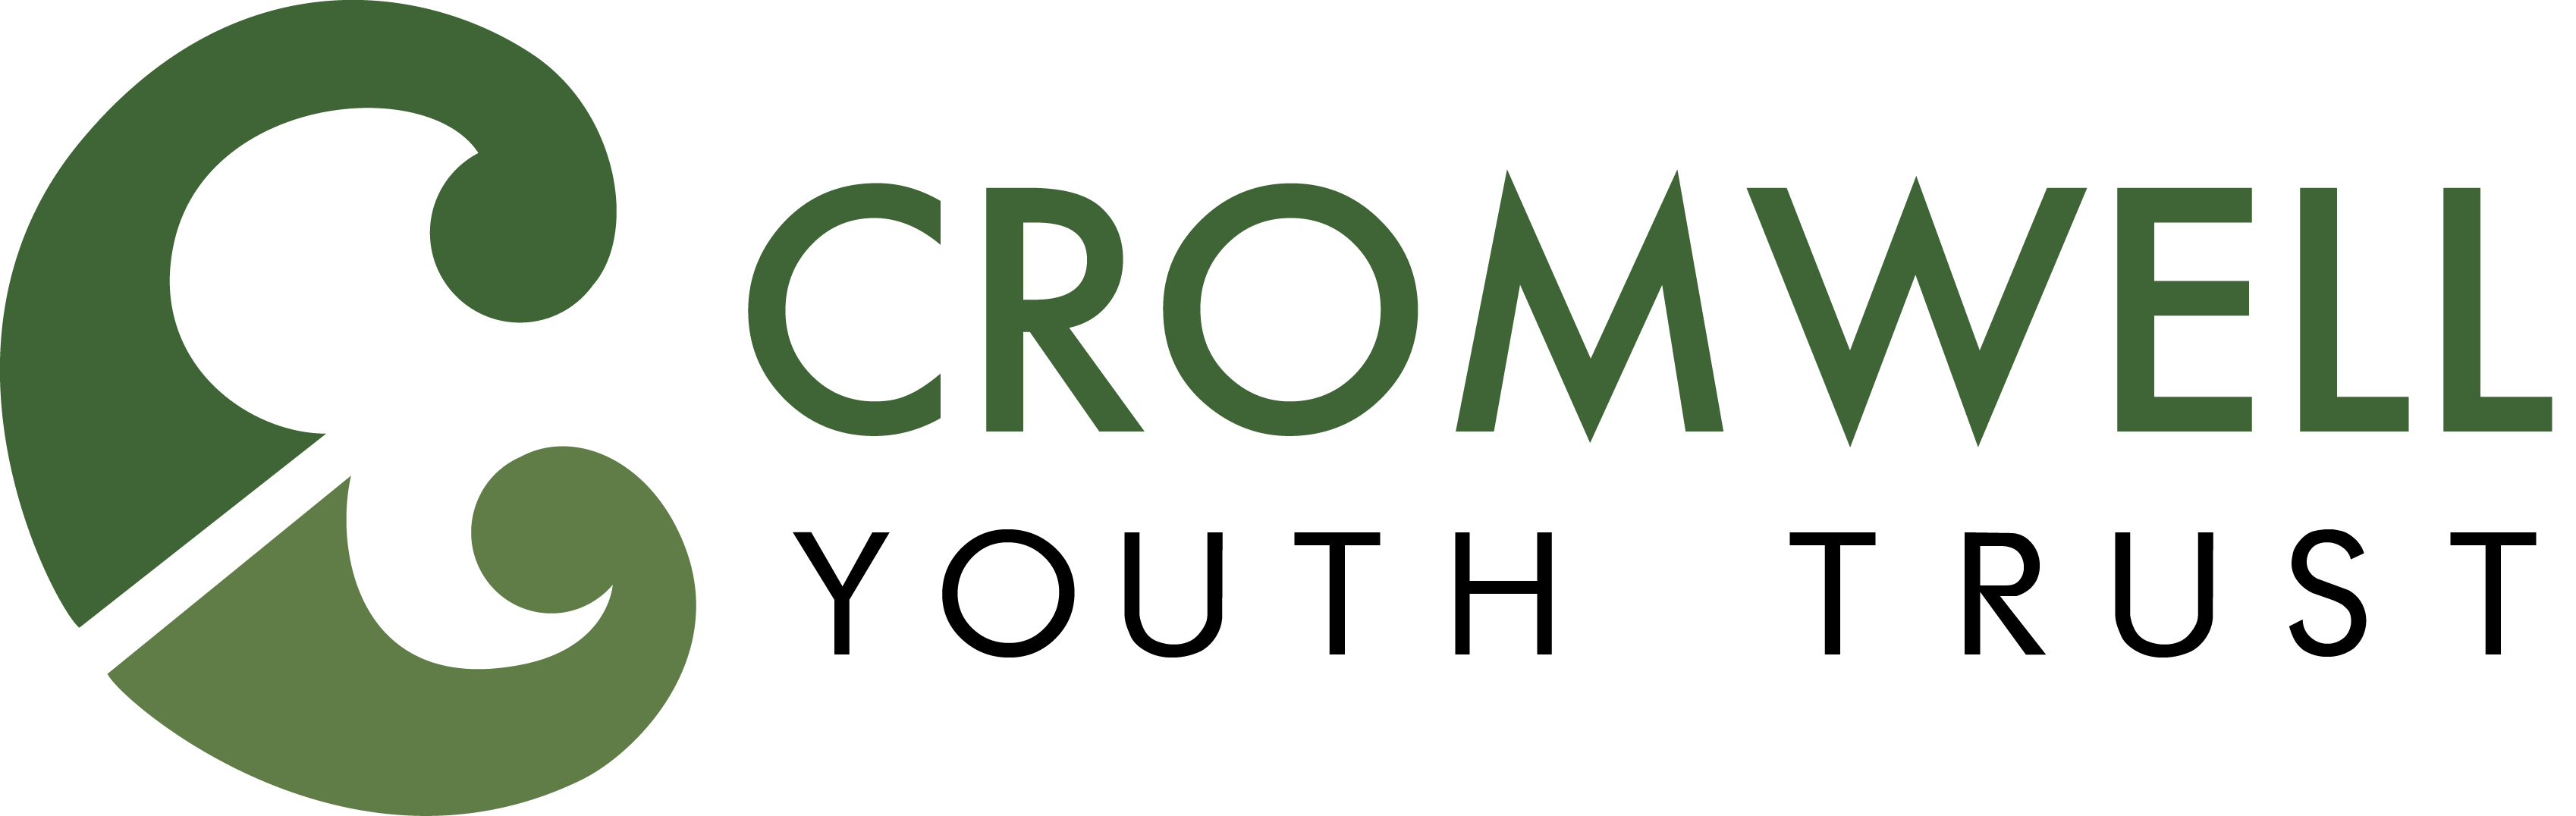 
Cromwell Youth Trust